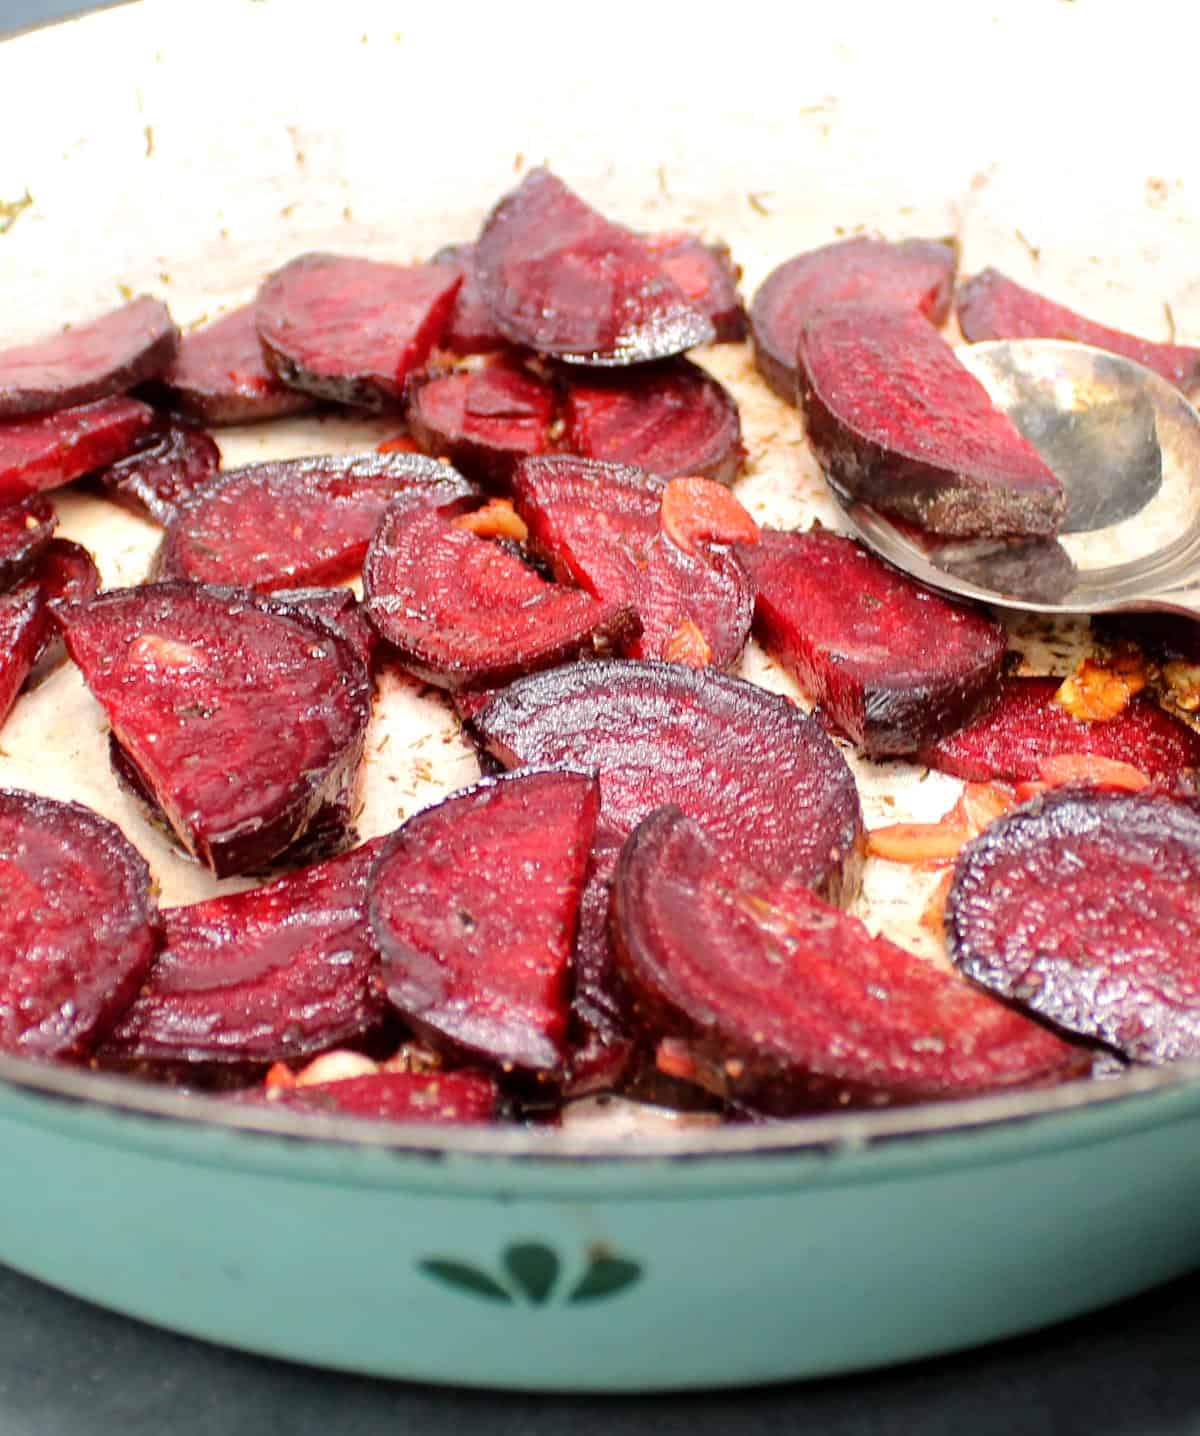 Close up of slices of deep red beetroot tossed with garlic and butter in a skillet.